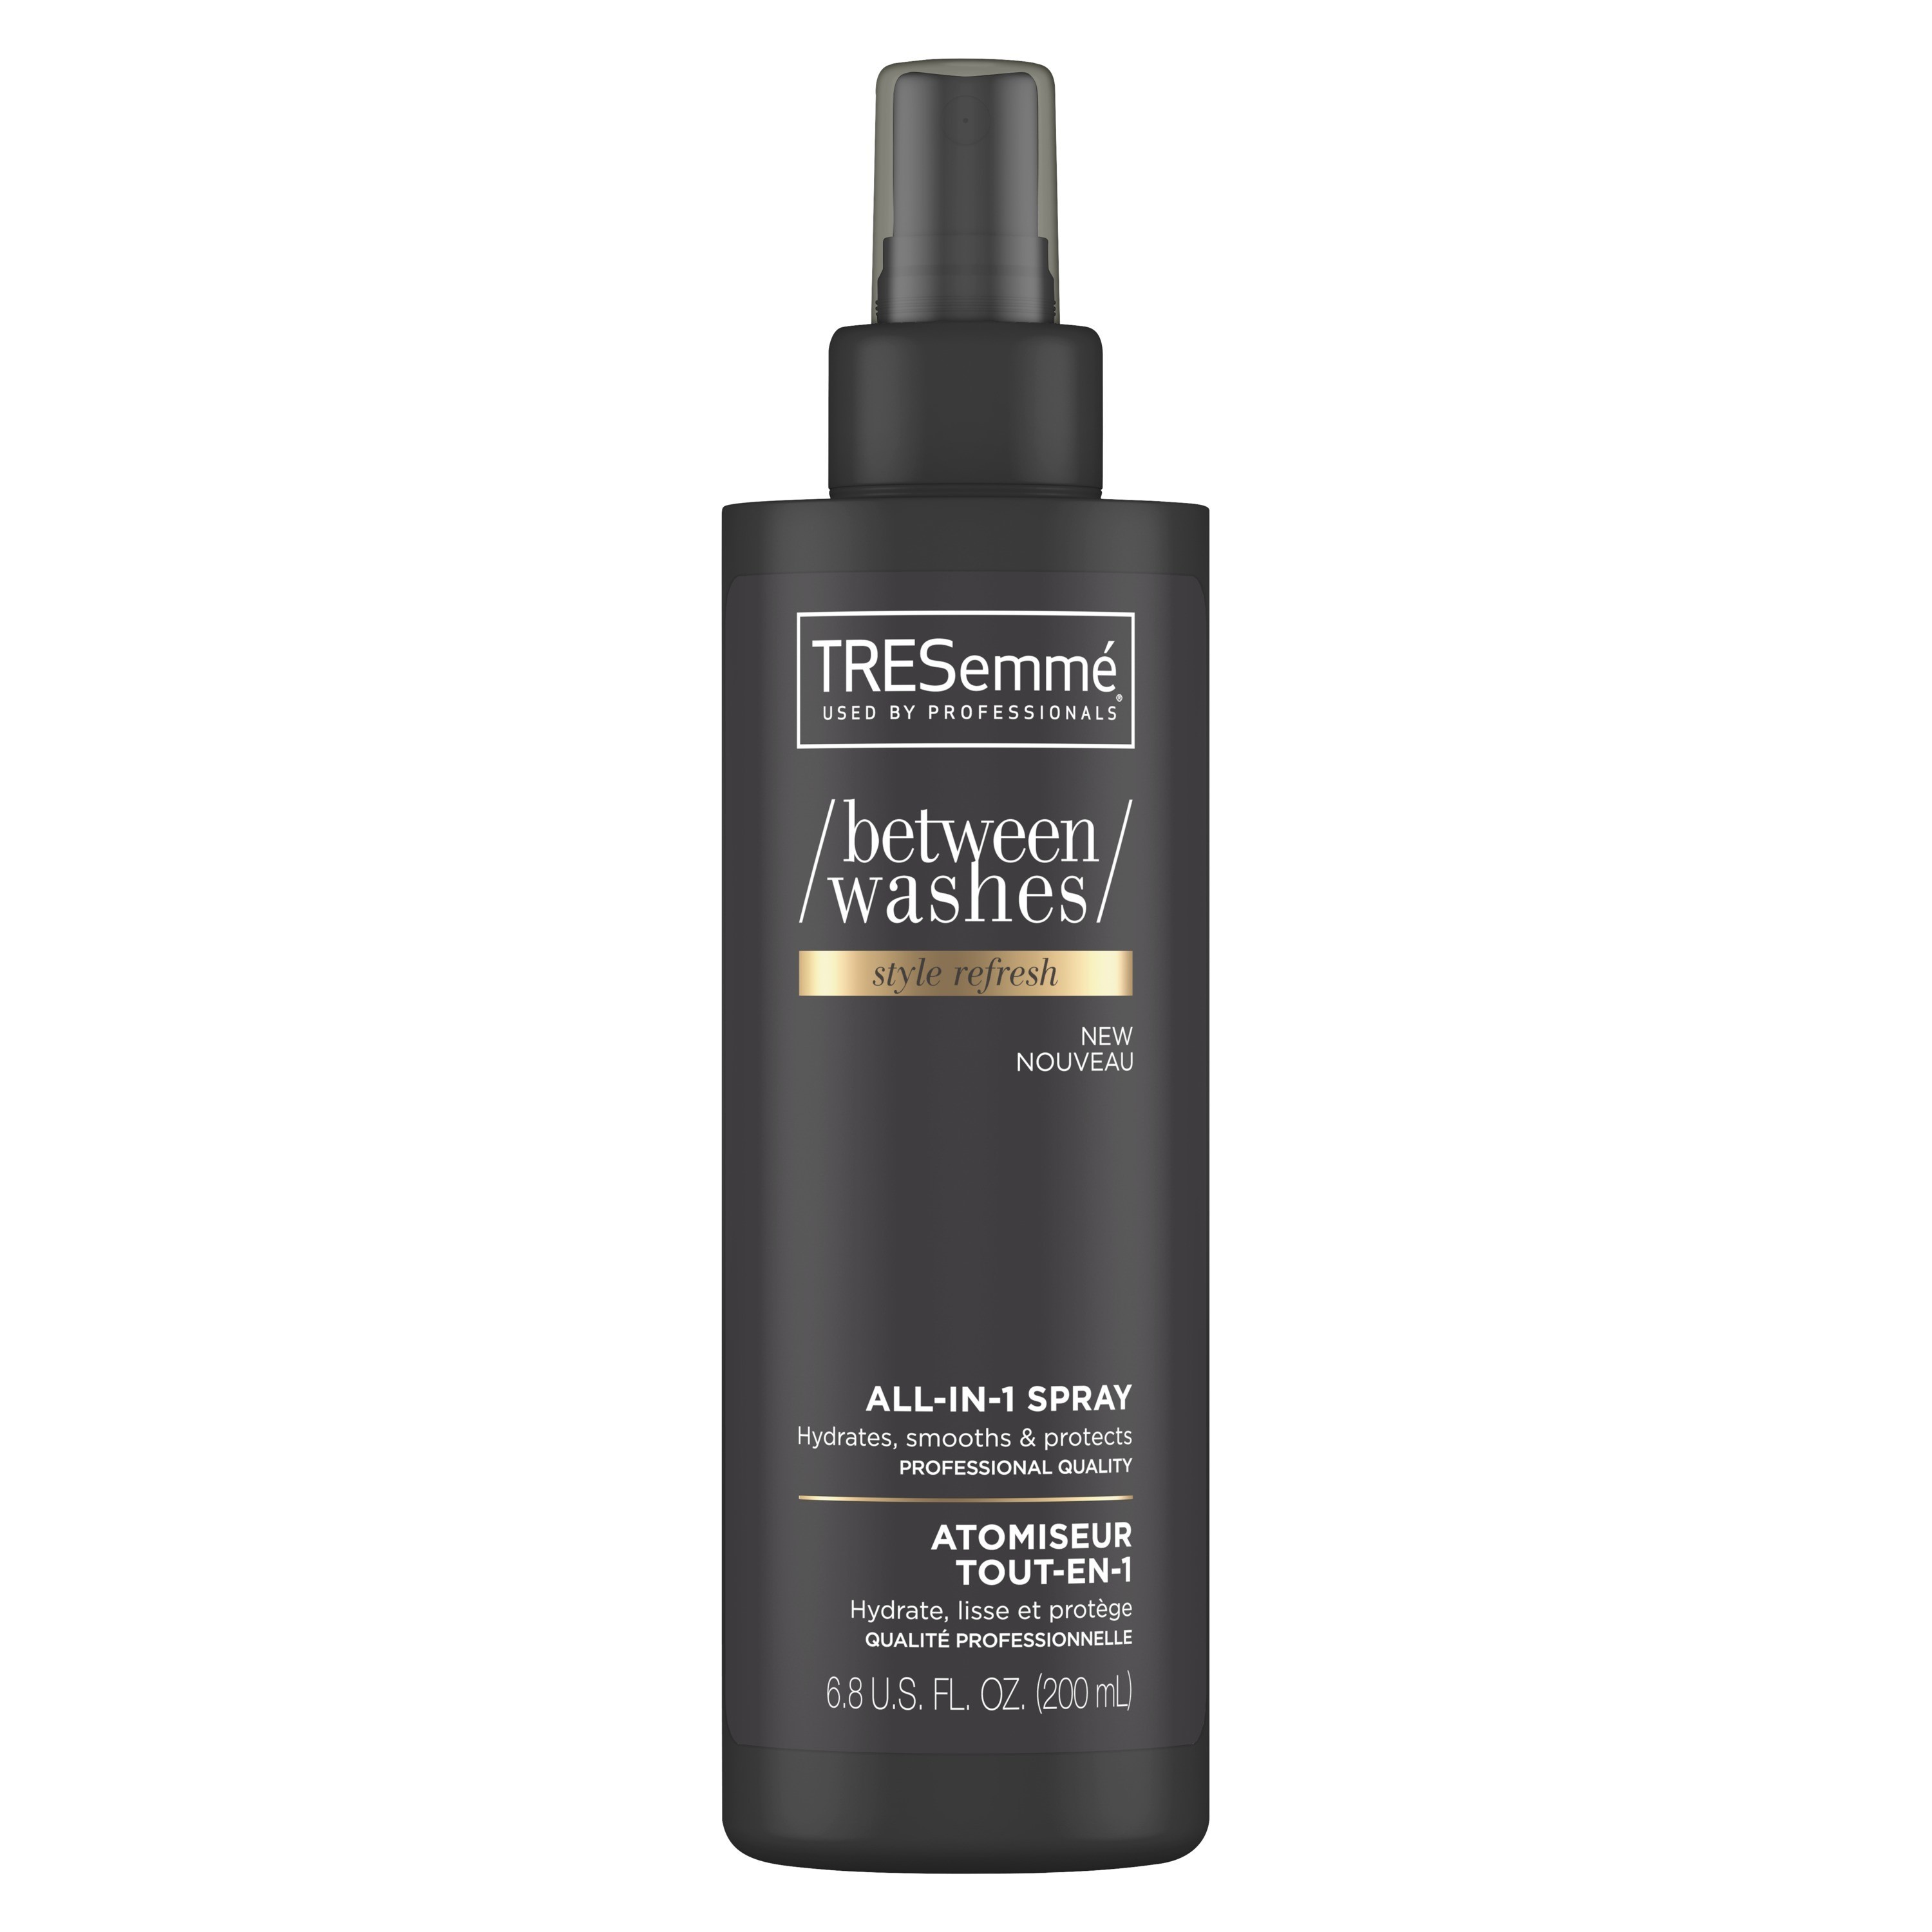 ($13 Value) TRESemme 3-Piece Moisture Rich Gift Set with Shampoo, Conditioner, and All-In-One Styling Spray - image 8 of 10